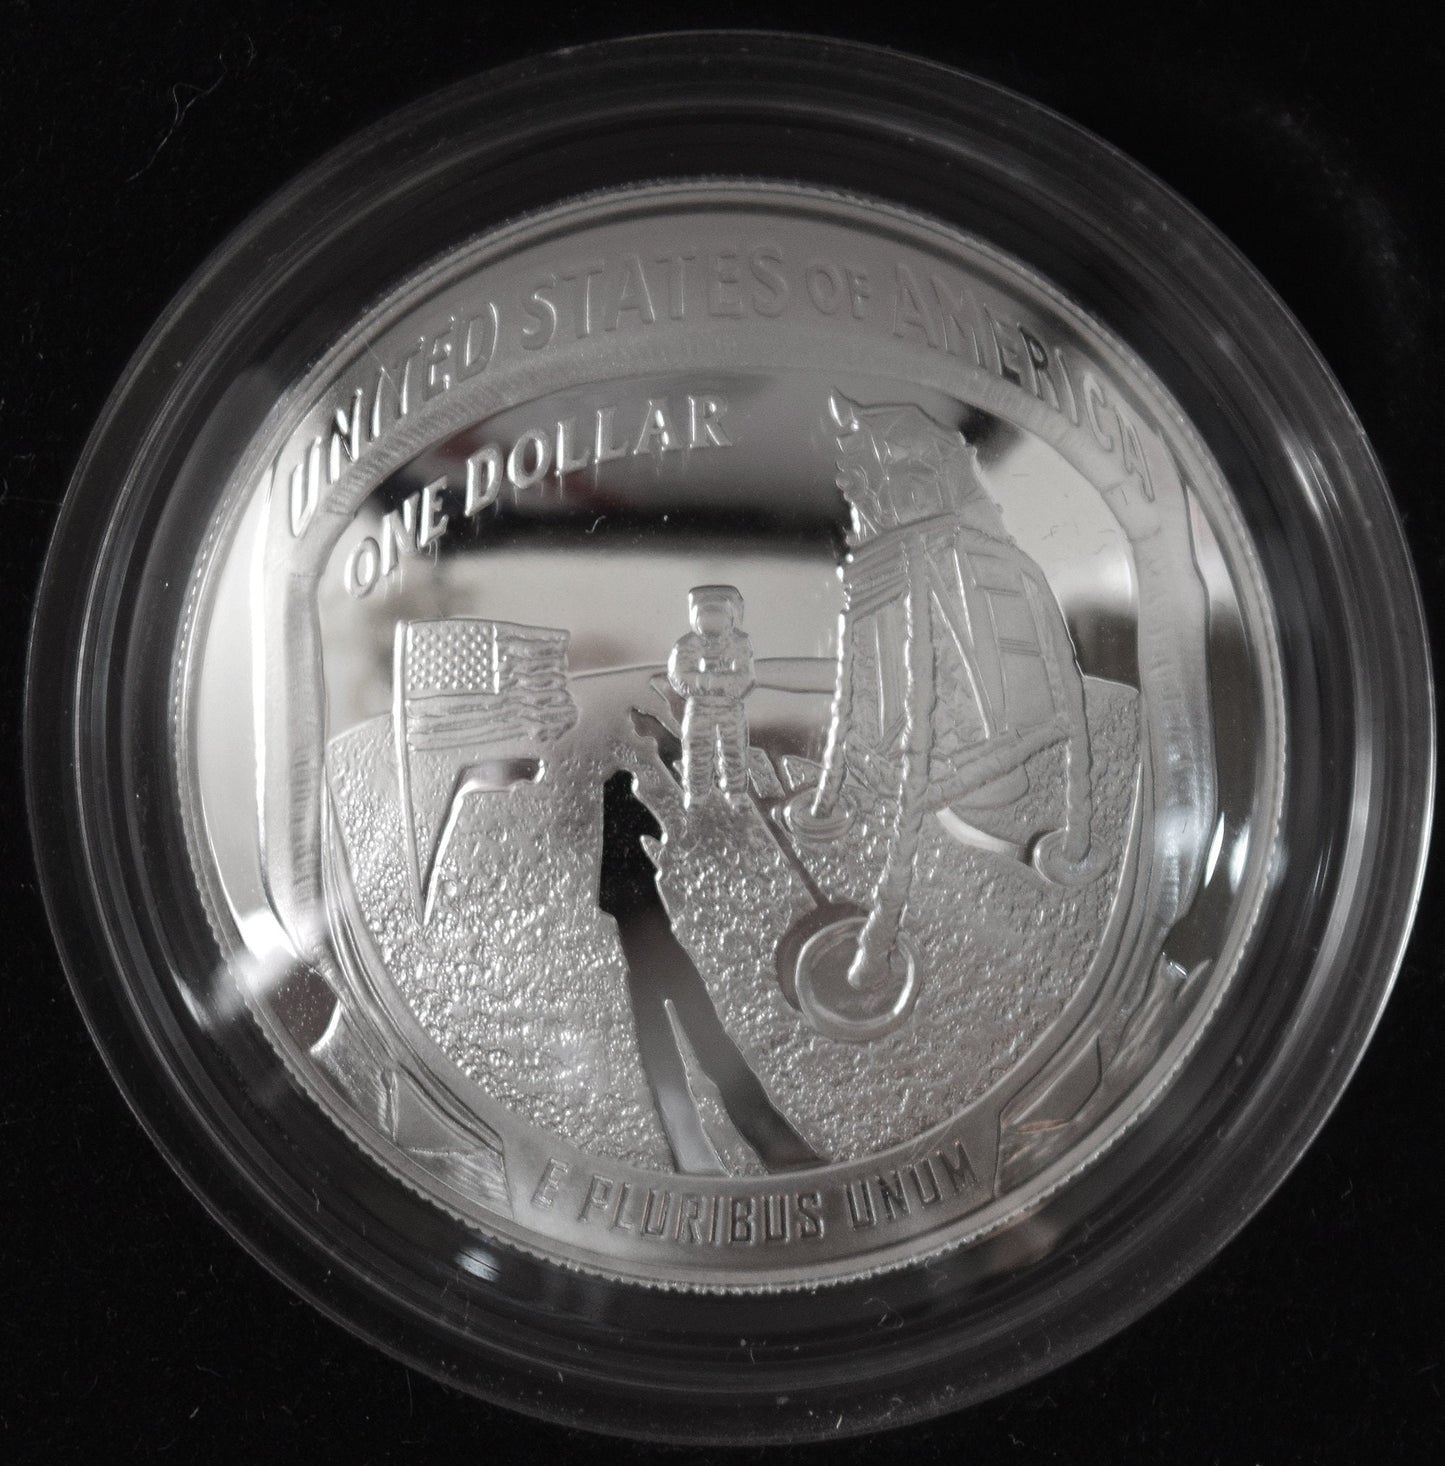 PROOF! - 2019 clad Apollo 11 half dollar, with all documents and original packaging.